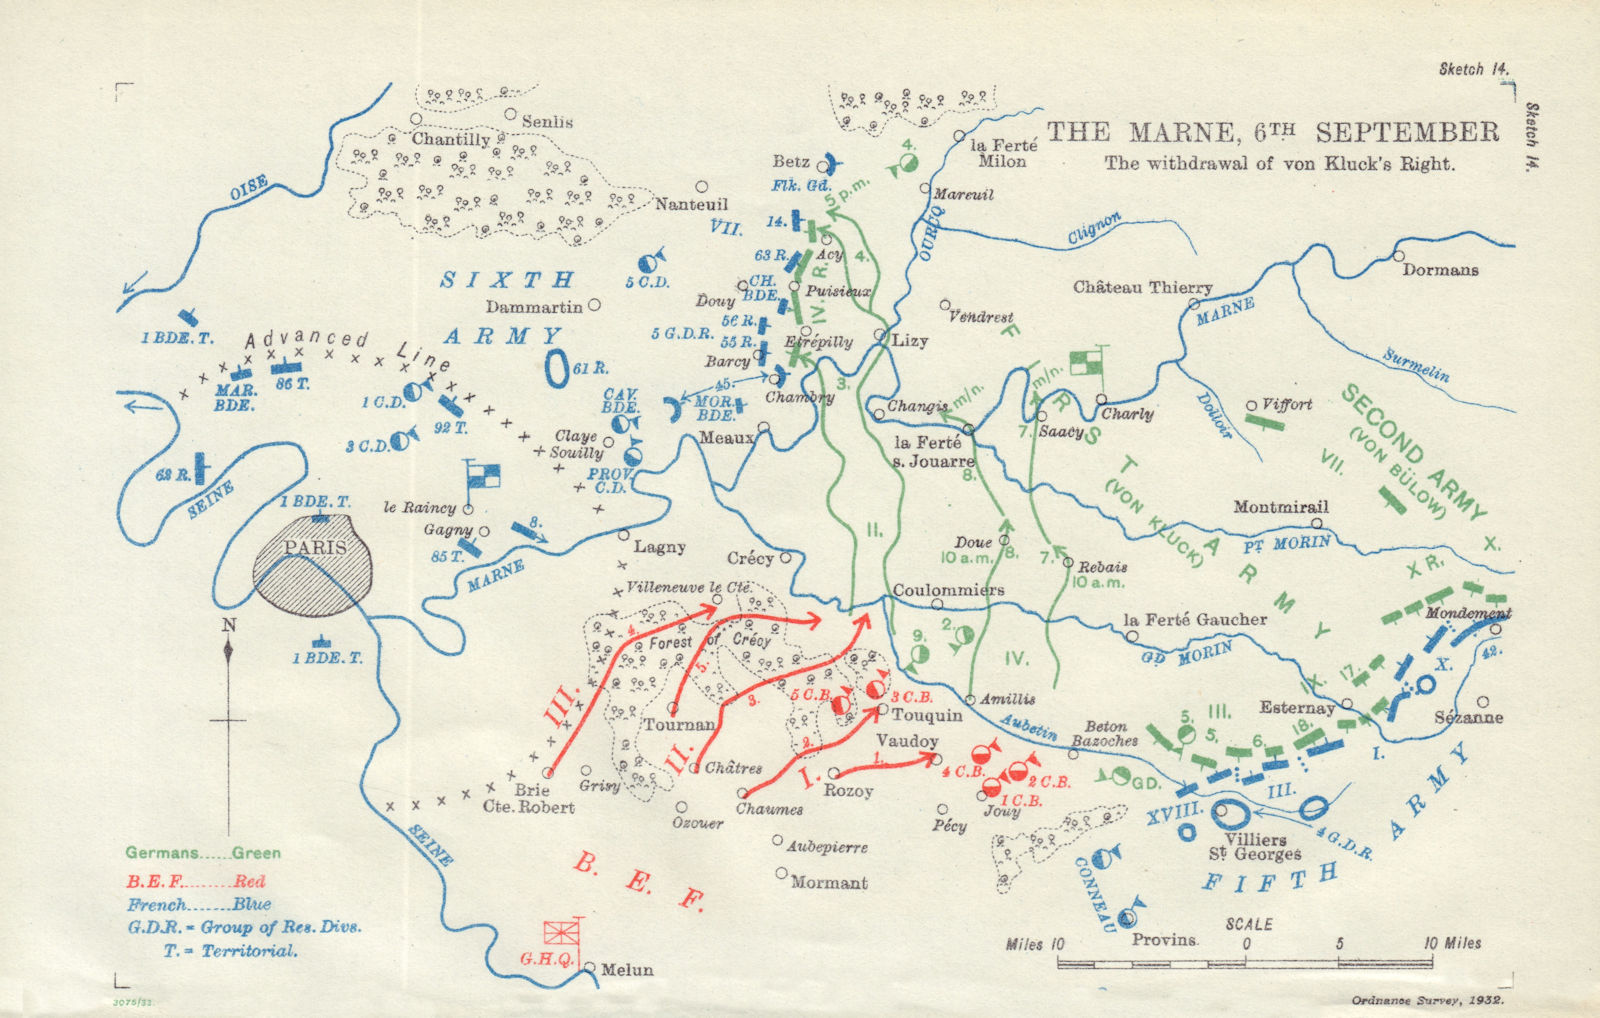 Battle of the Marne 6th September 1914. Withdrawal of von Kluck's Right 1933 map